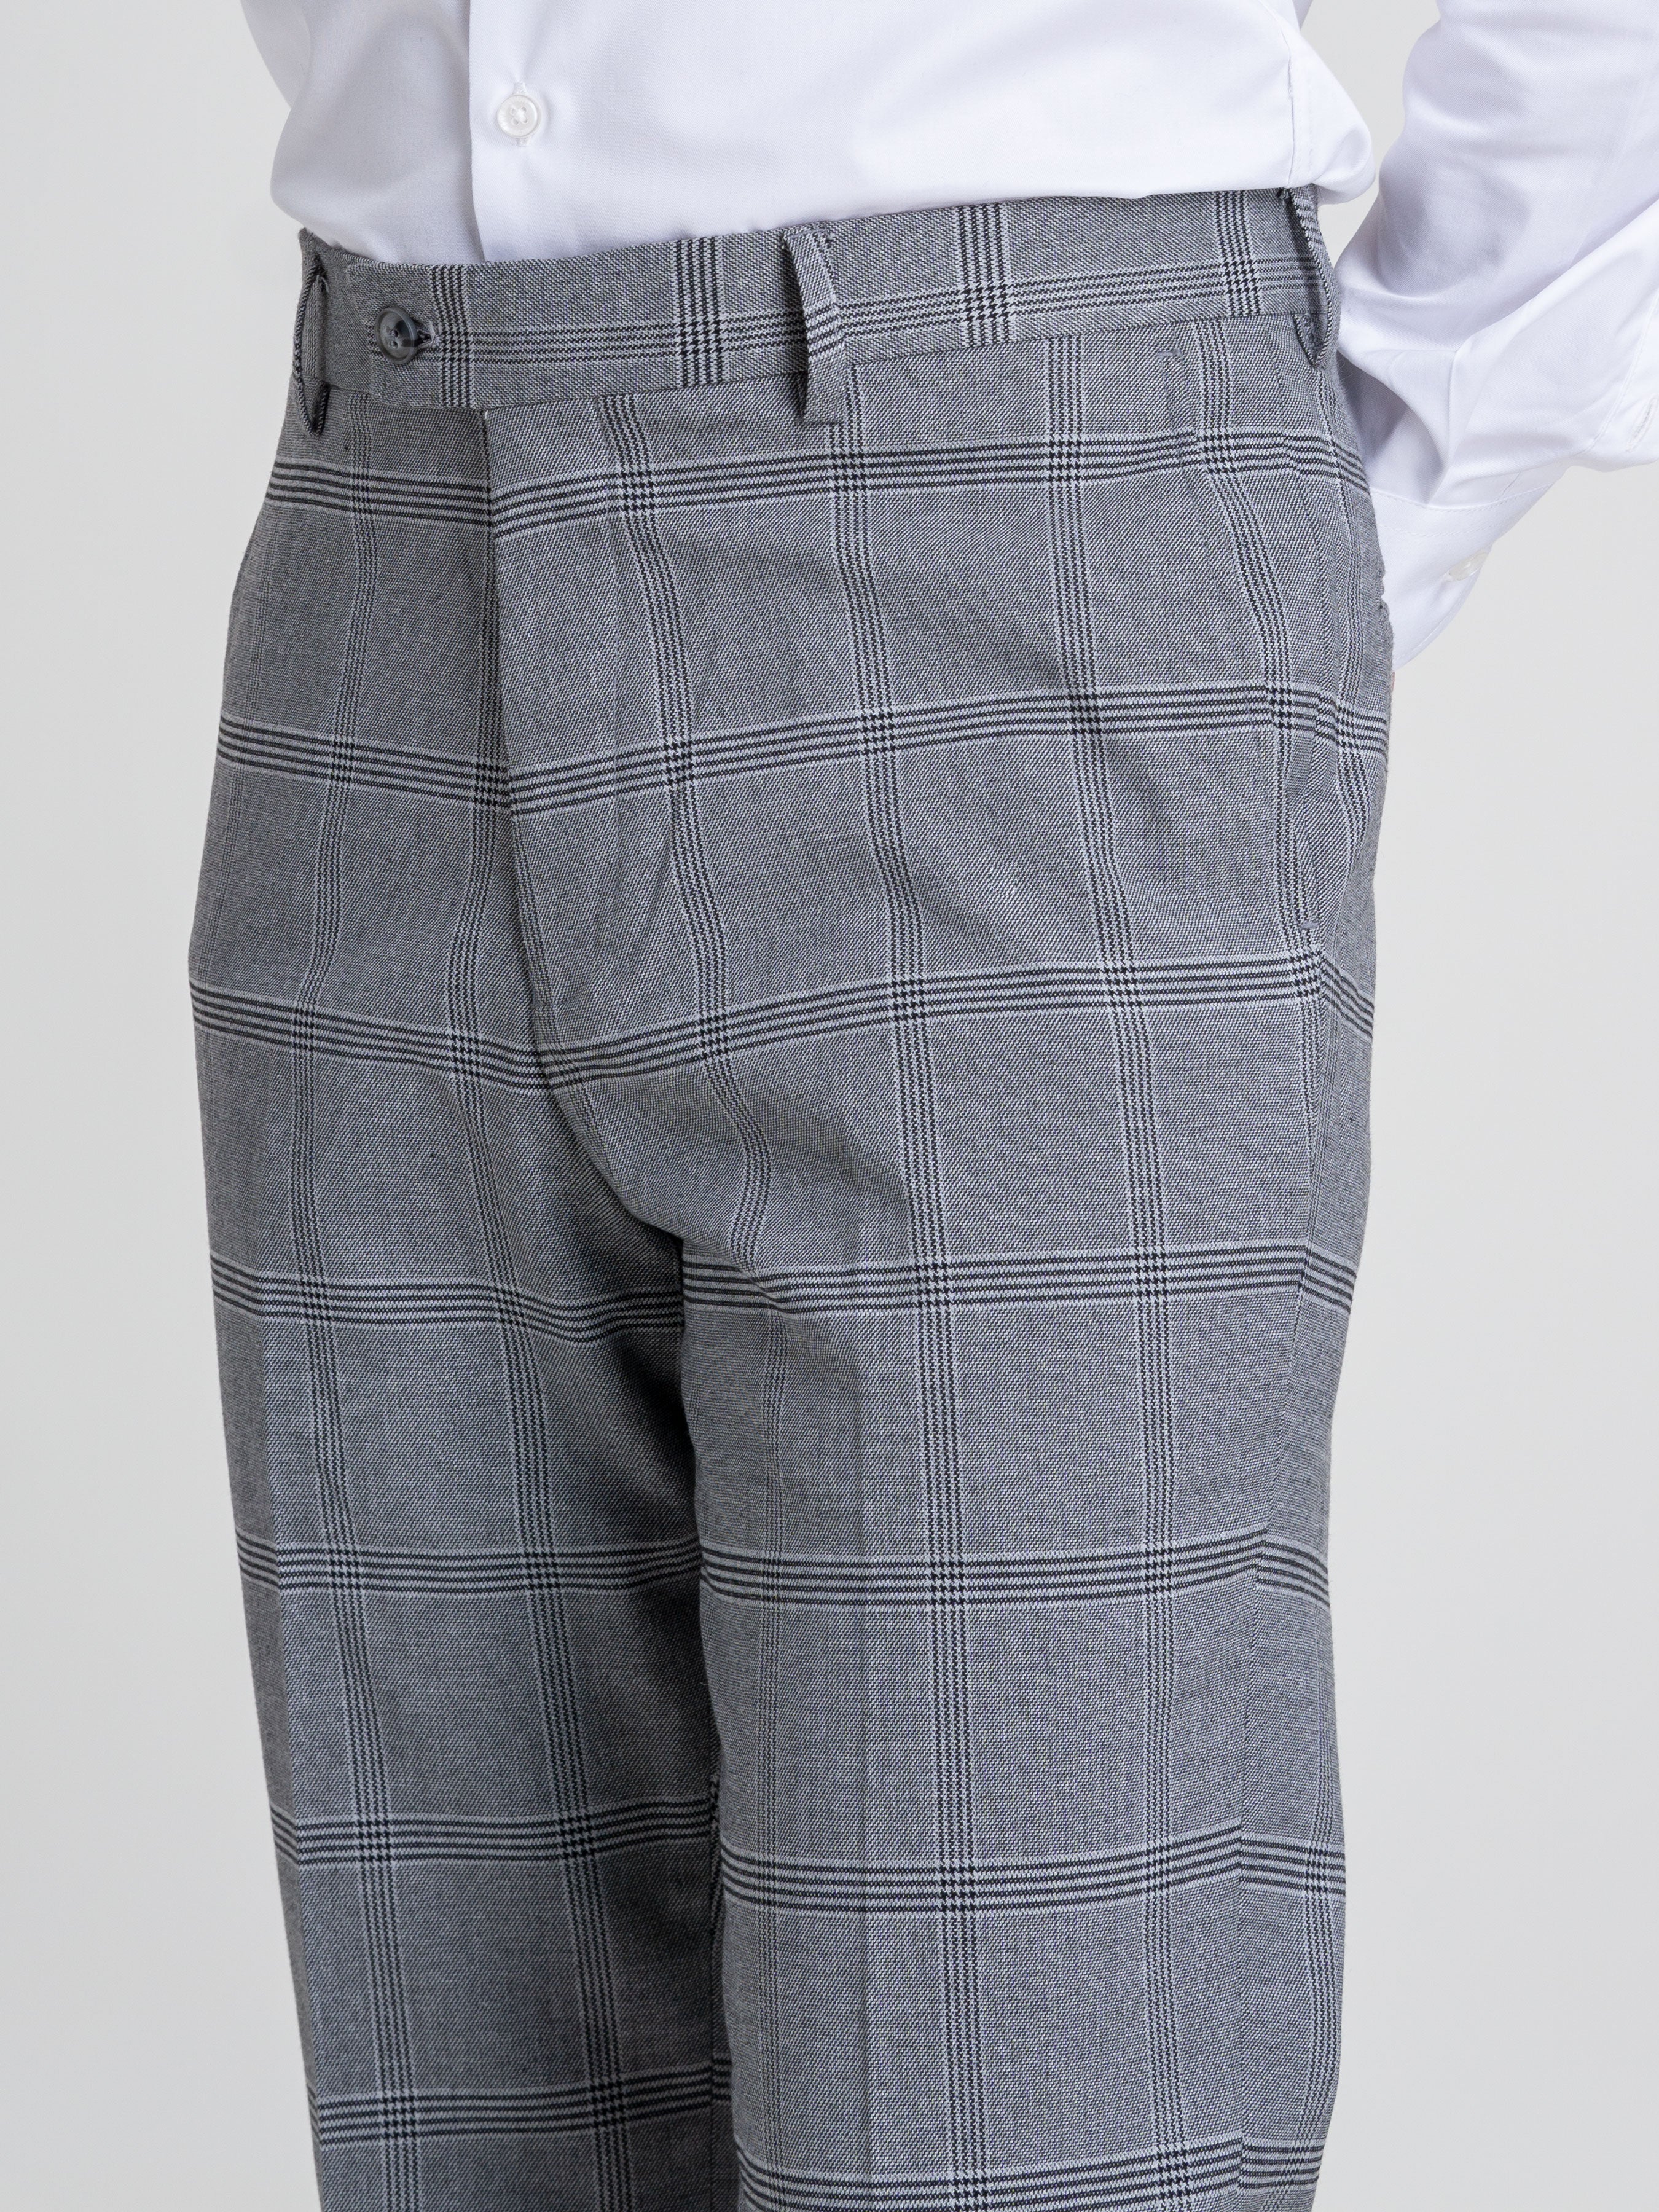 Trousers With Belt Loop - Grey Checkered (Stretchable) - Zeve Shoes